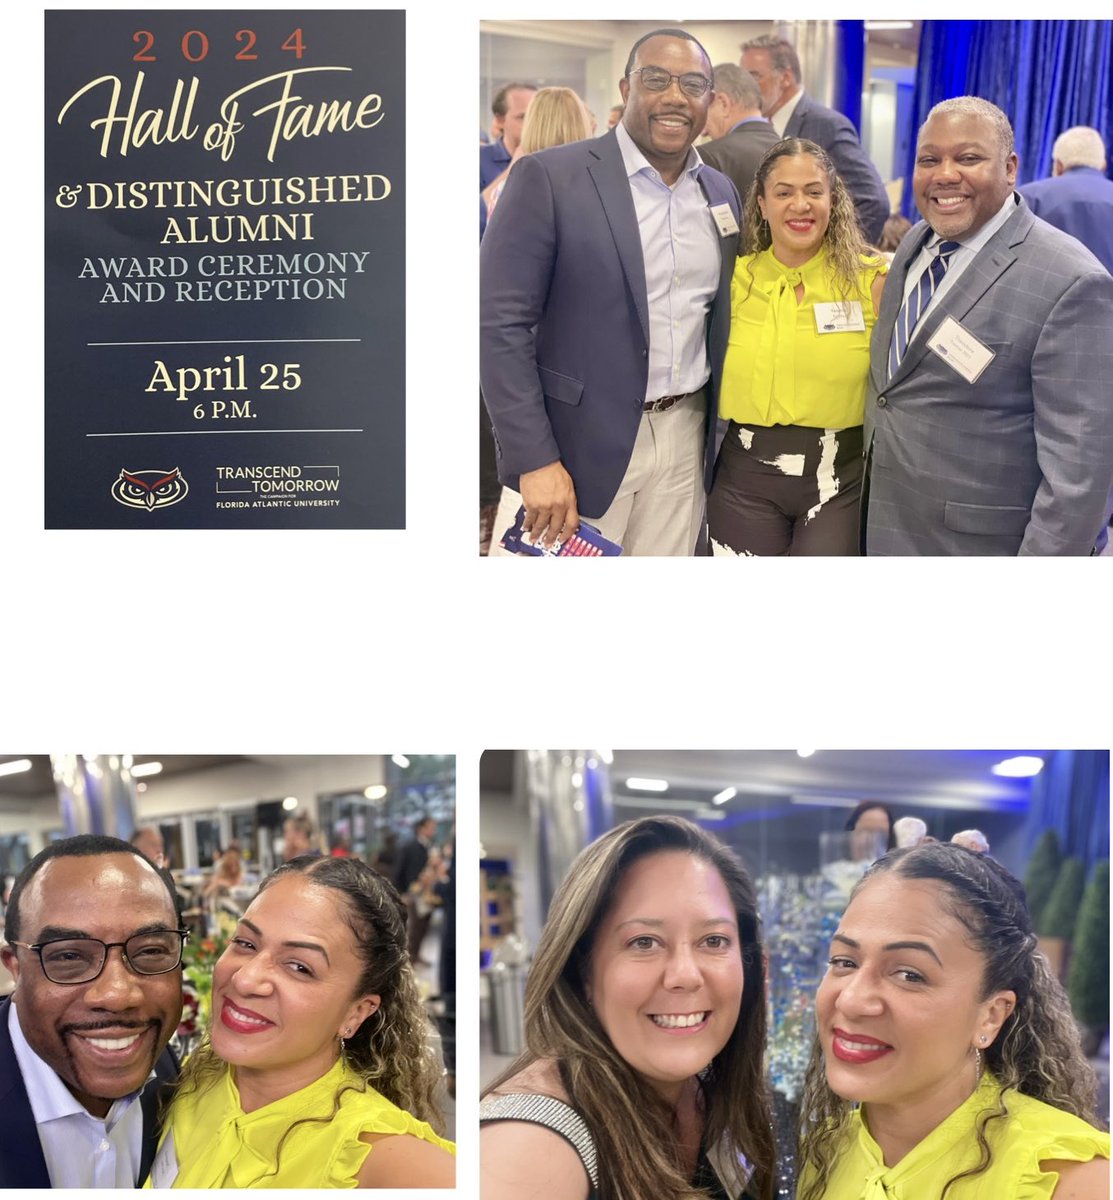 Great evening at FAU witnessing Dr. Toomer being recognized in the 2024 Hall of Fame & Distinguished Alumni Award Ceremony. Thank you Dr. Toomer for your great leadership, motivation and support. @tedtoomer1 @mrhhamm @Jessi_2f